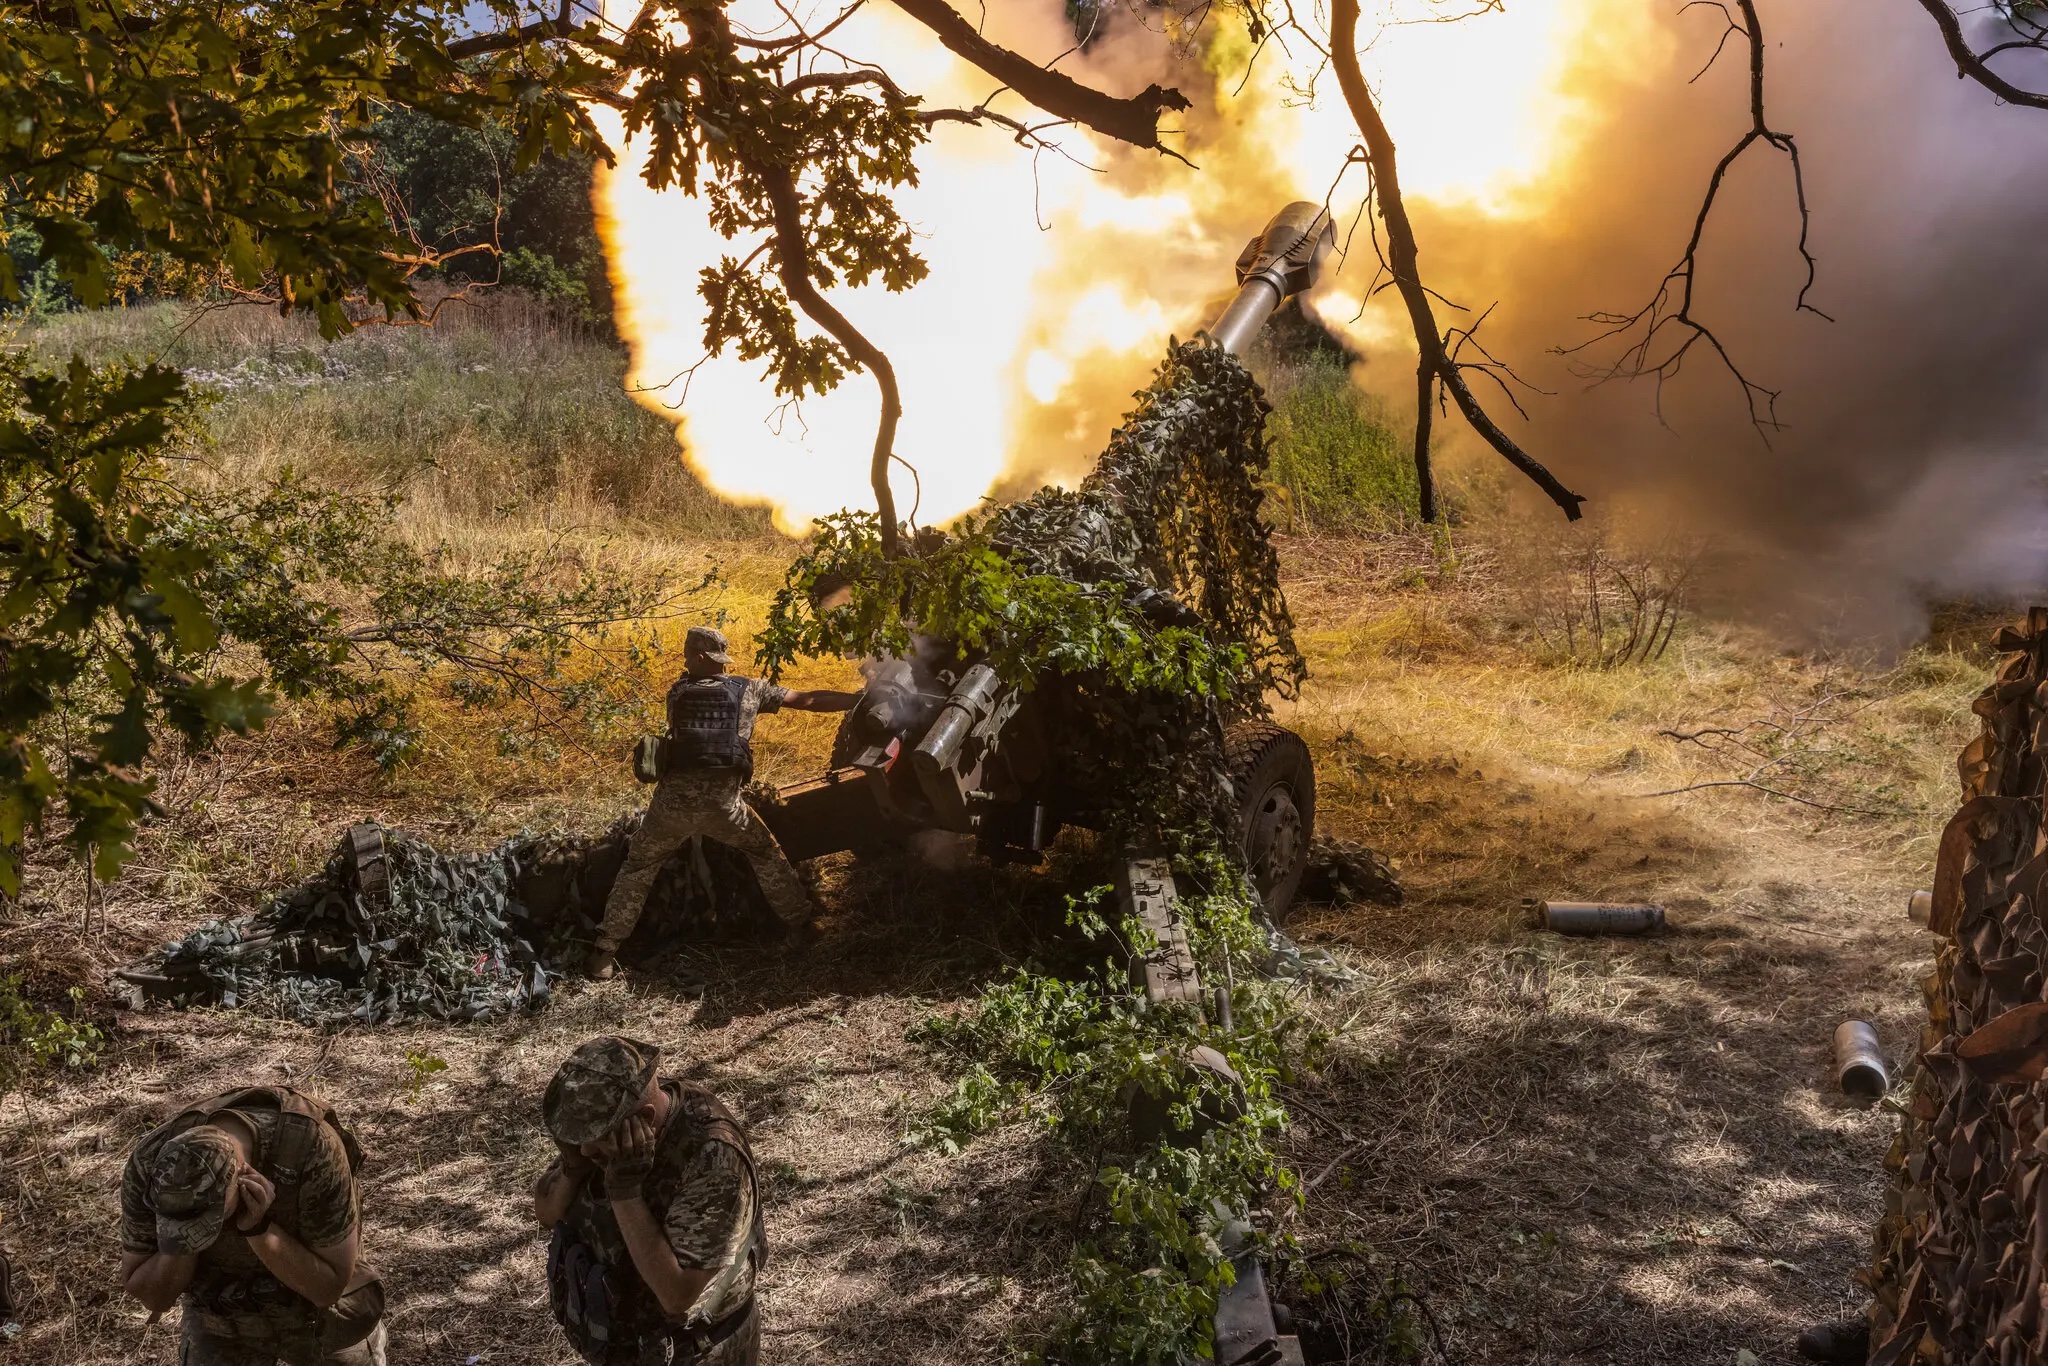 An artillery unit from Ukraine’s 58th Brigade near the town of Bakhmut fired toward an advancing Russian infantry unit around the town of Pokrovske on Aug. 10. David Guttenfelder The New York Times 